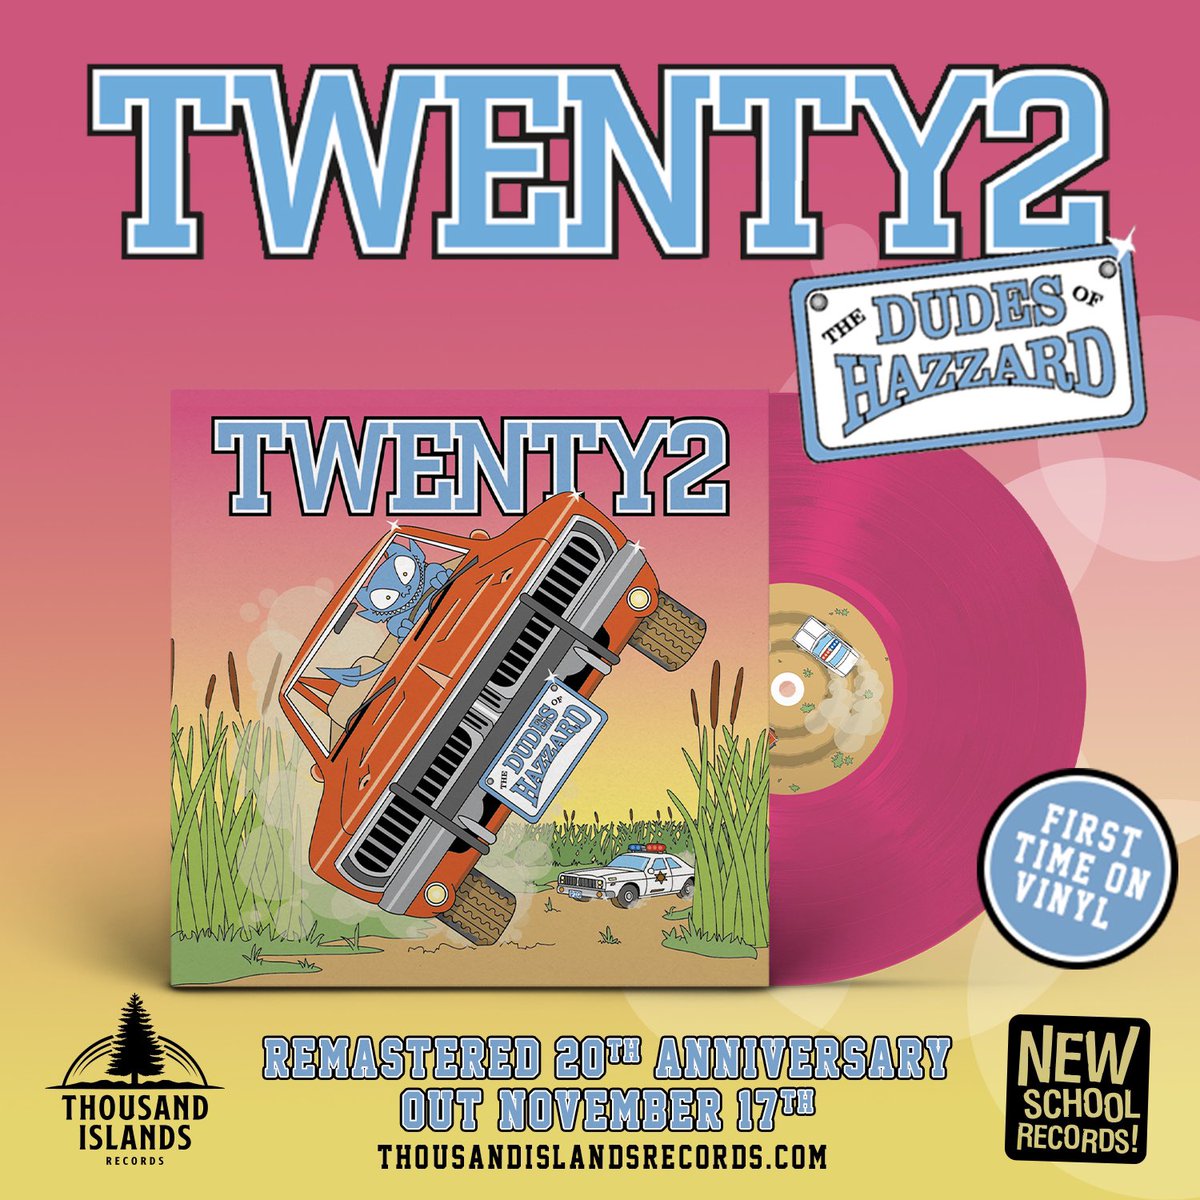 Excited to team up with New School Records for the 20th anniversary and first time on vinyl reissue of Twenty2’s The Dudes Of Hazzard! First single World Of Mine is out now everywhere and pre-orders are live in our shop! thousandislandsrecords.com/2023/11/06/twe…